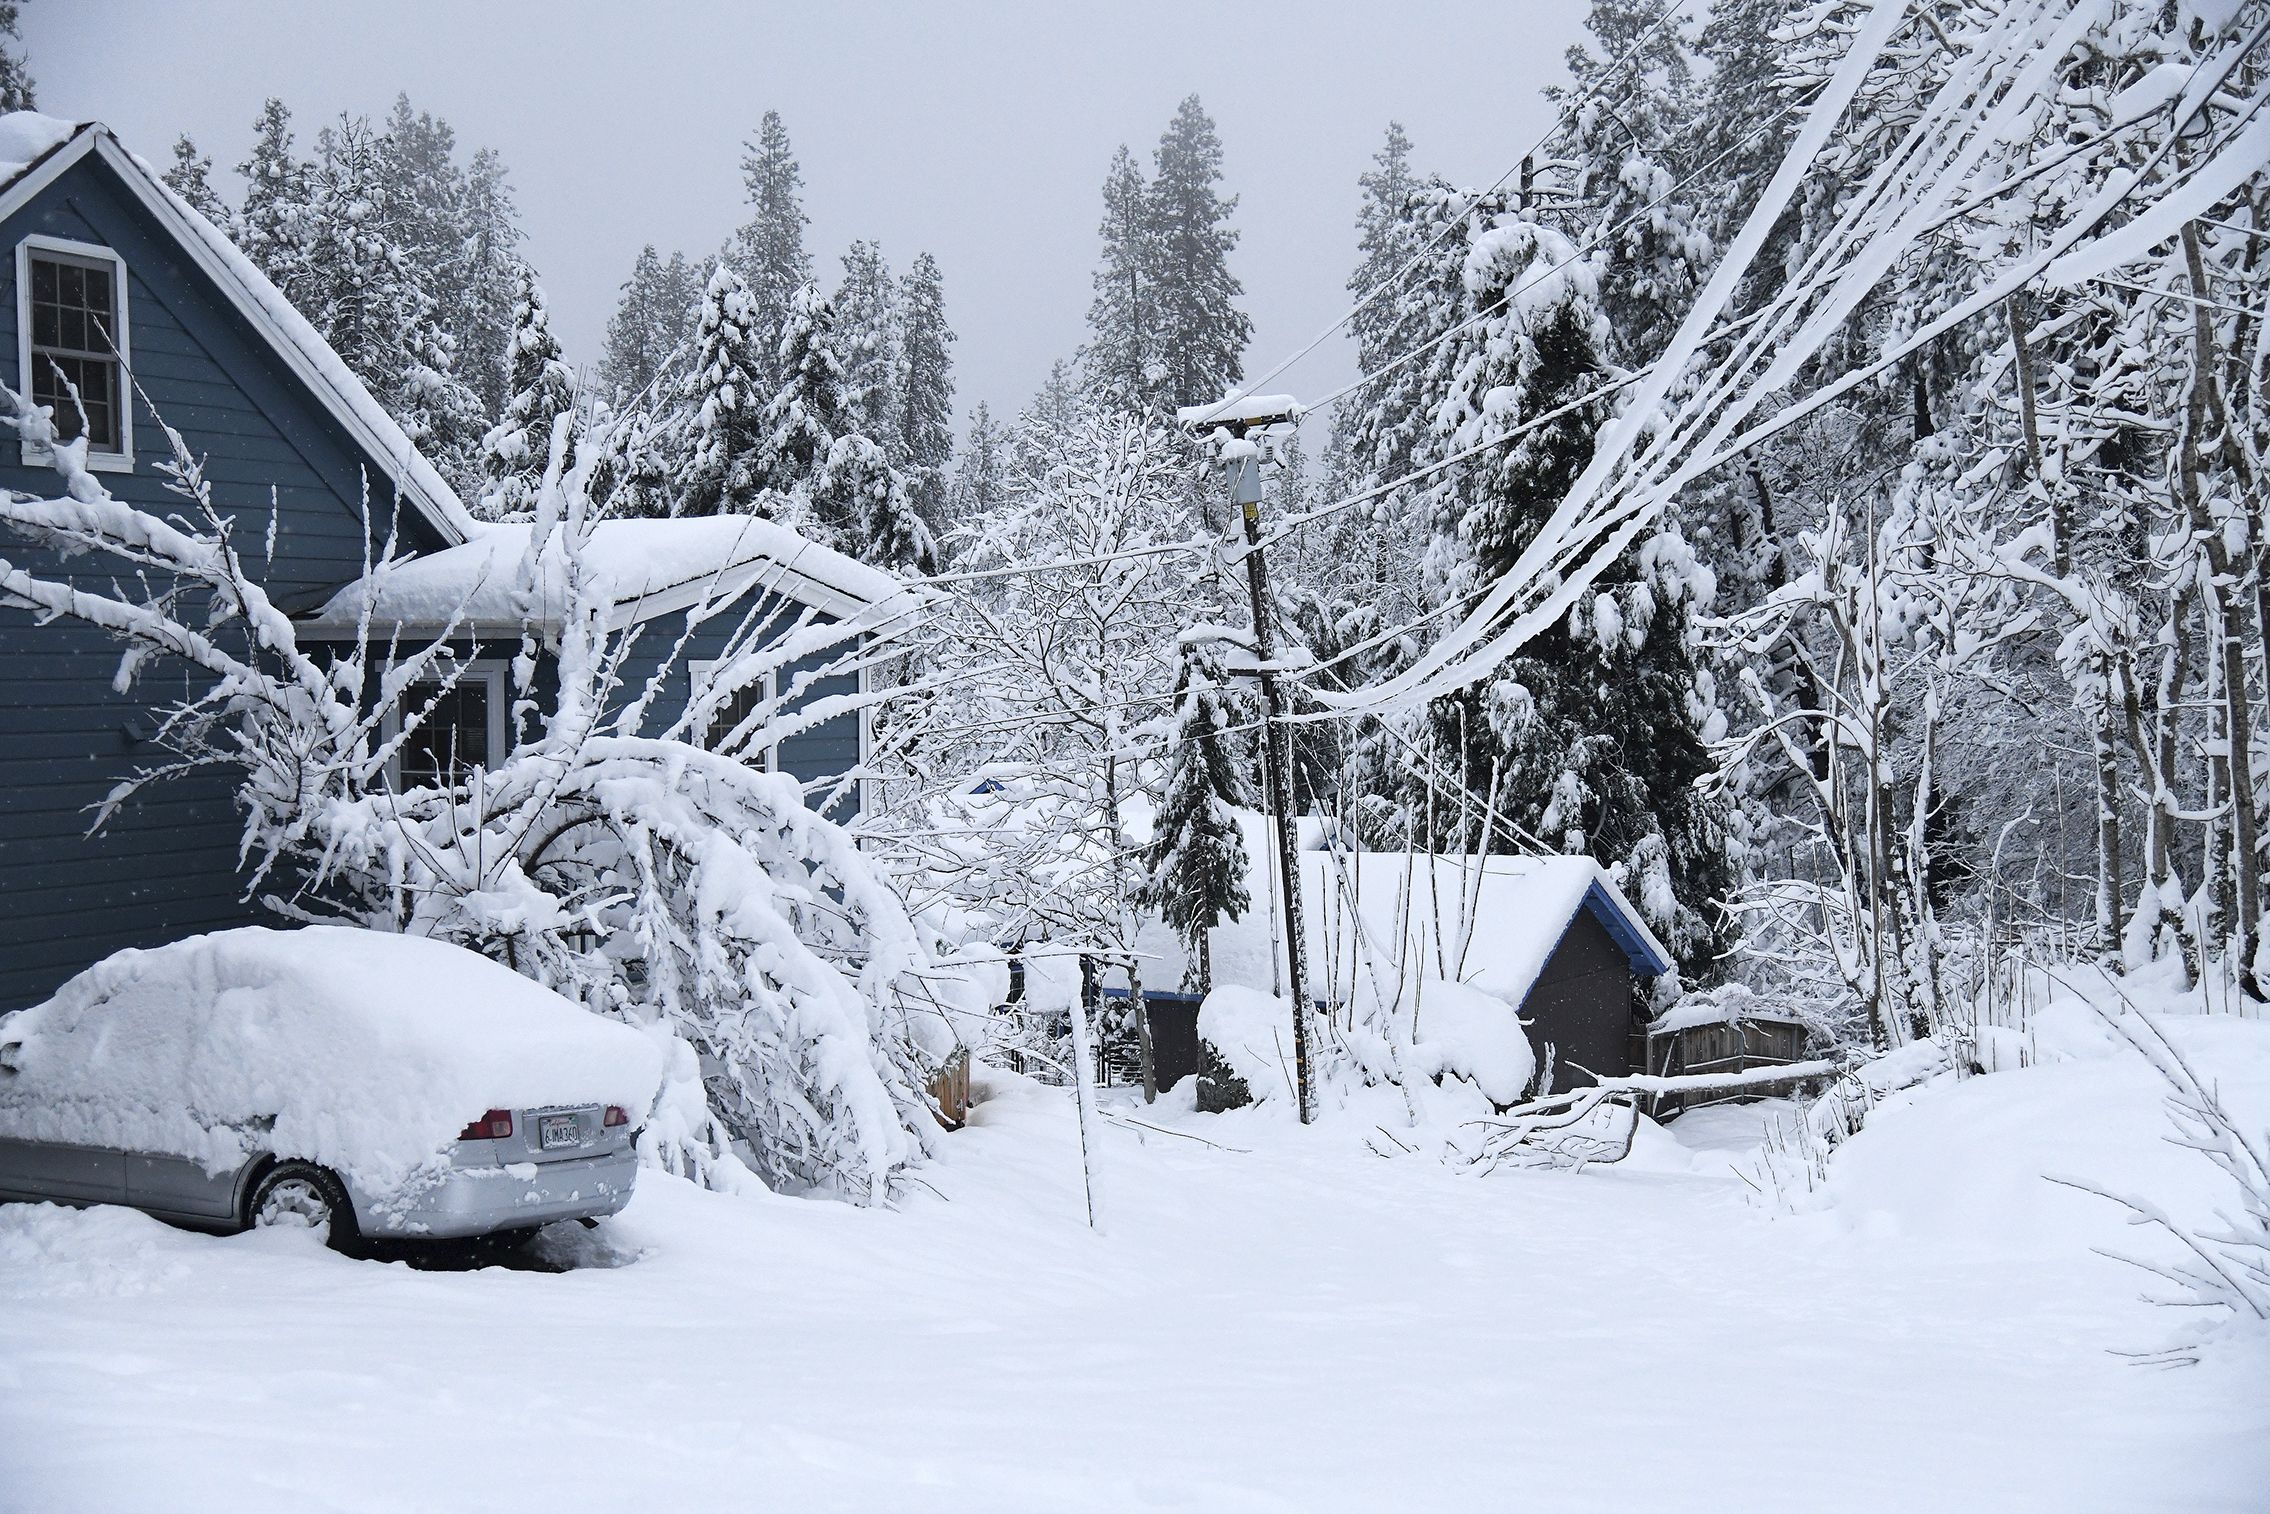 UC Berkeley Snow Lab Detected Over 8 Inches of Snow in Sierra Nevada This Weekend